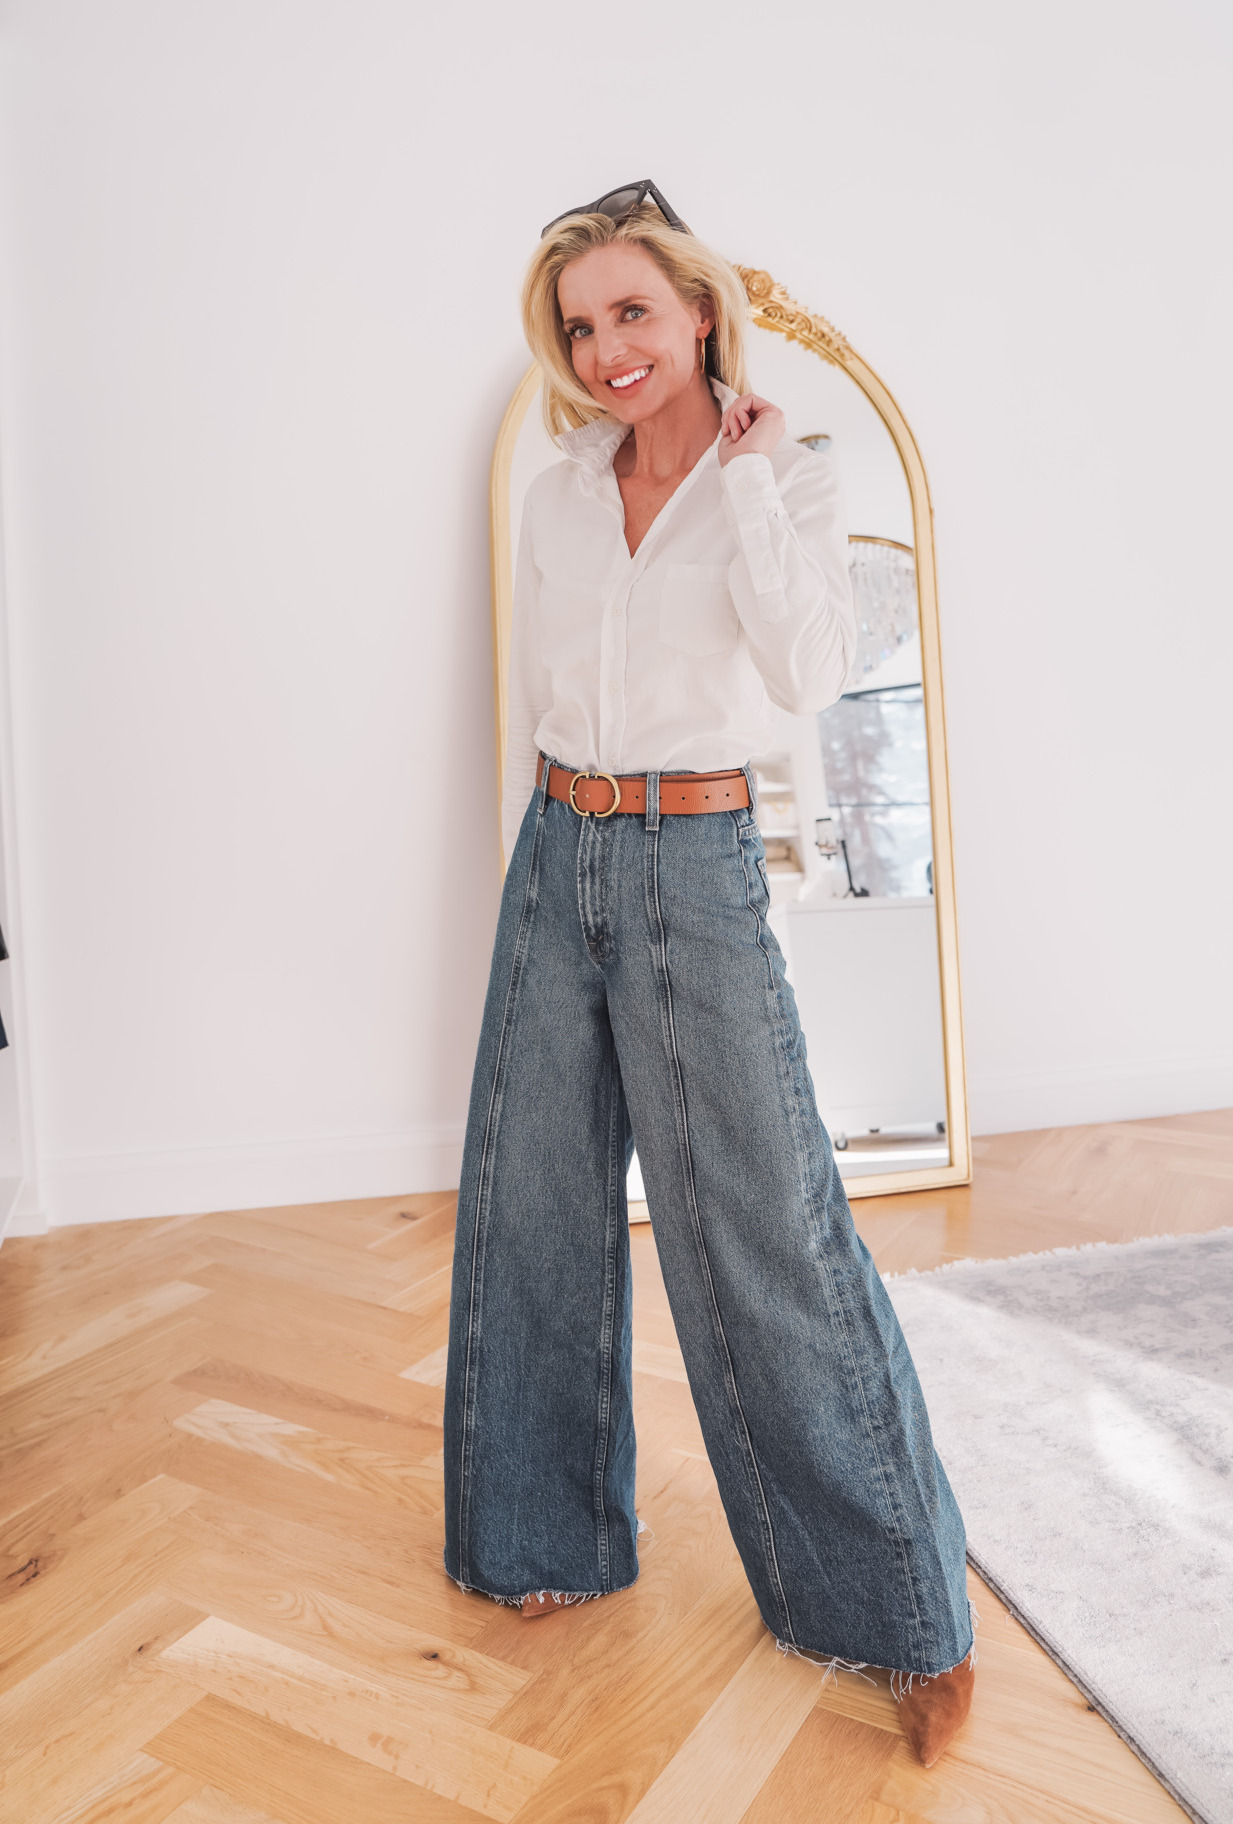 Tips to Look Taller in Baggy Jeans